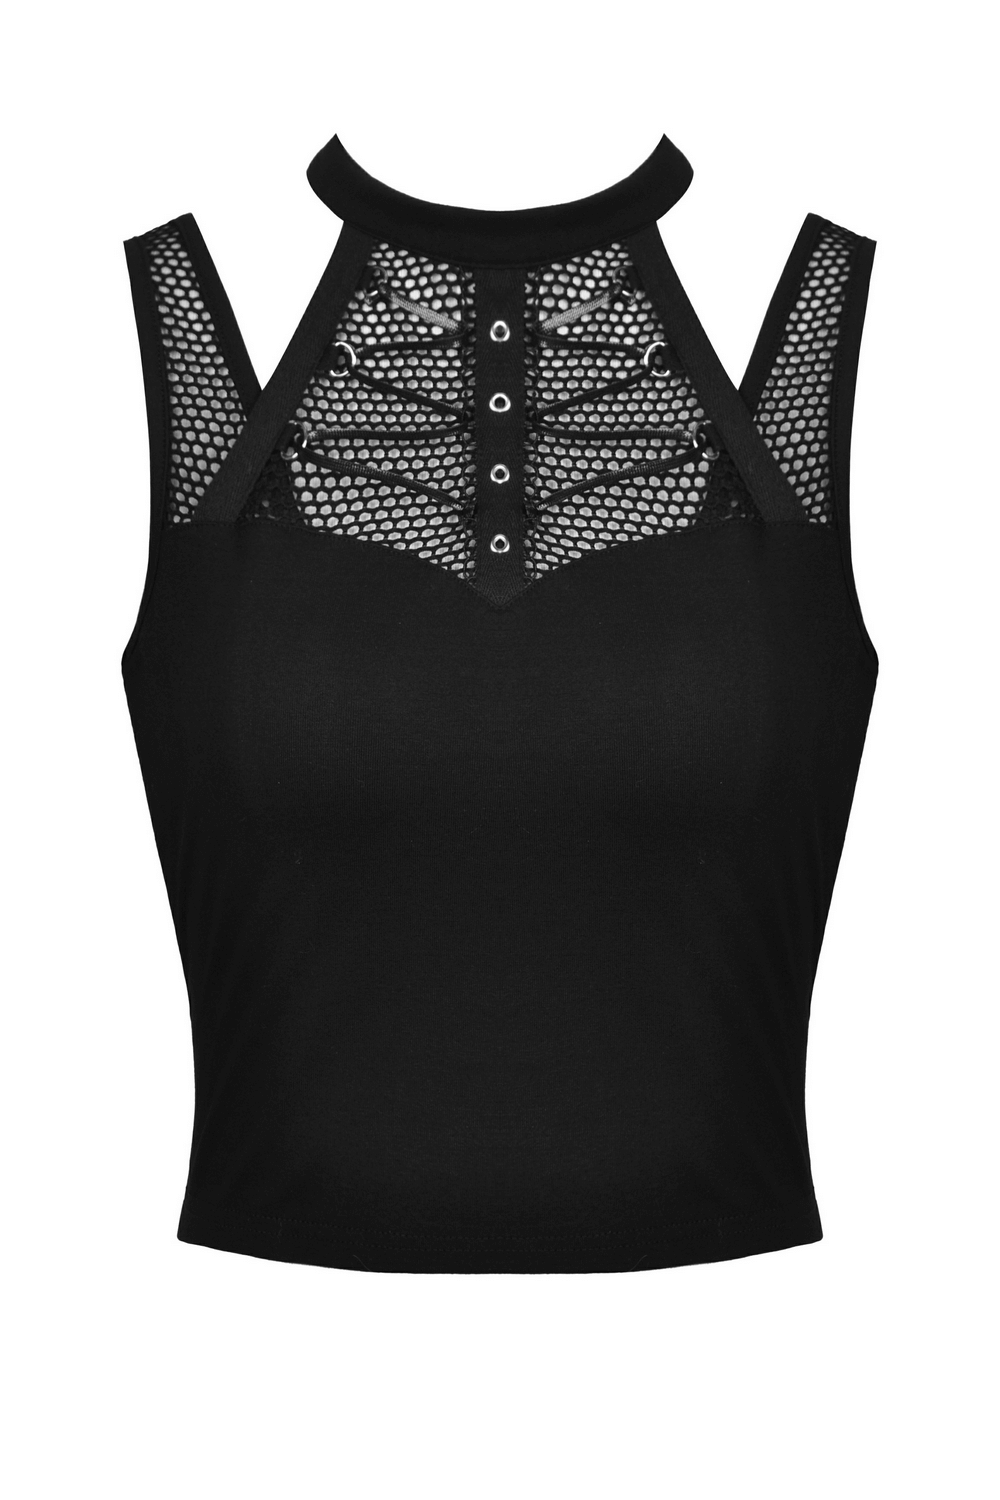 Punk Female Sleeveless Crop Top with Ribcage Mesh Detailing